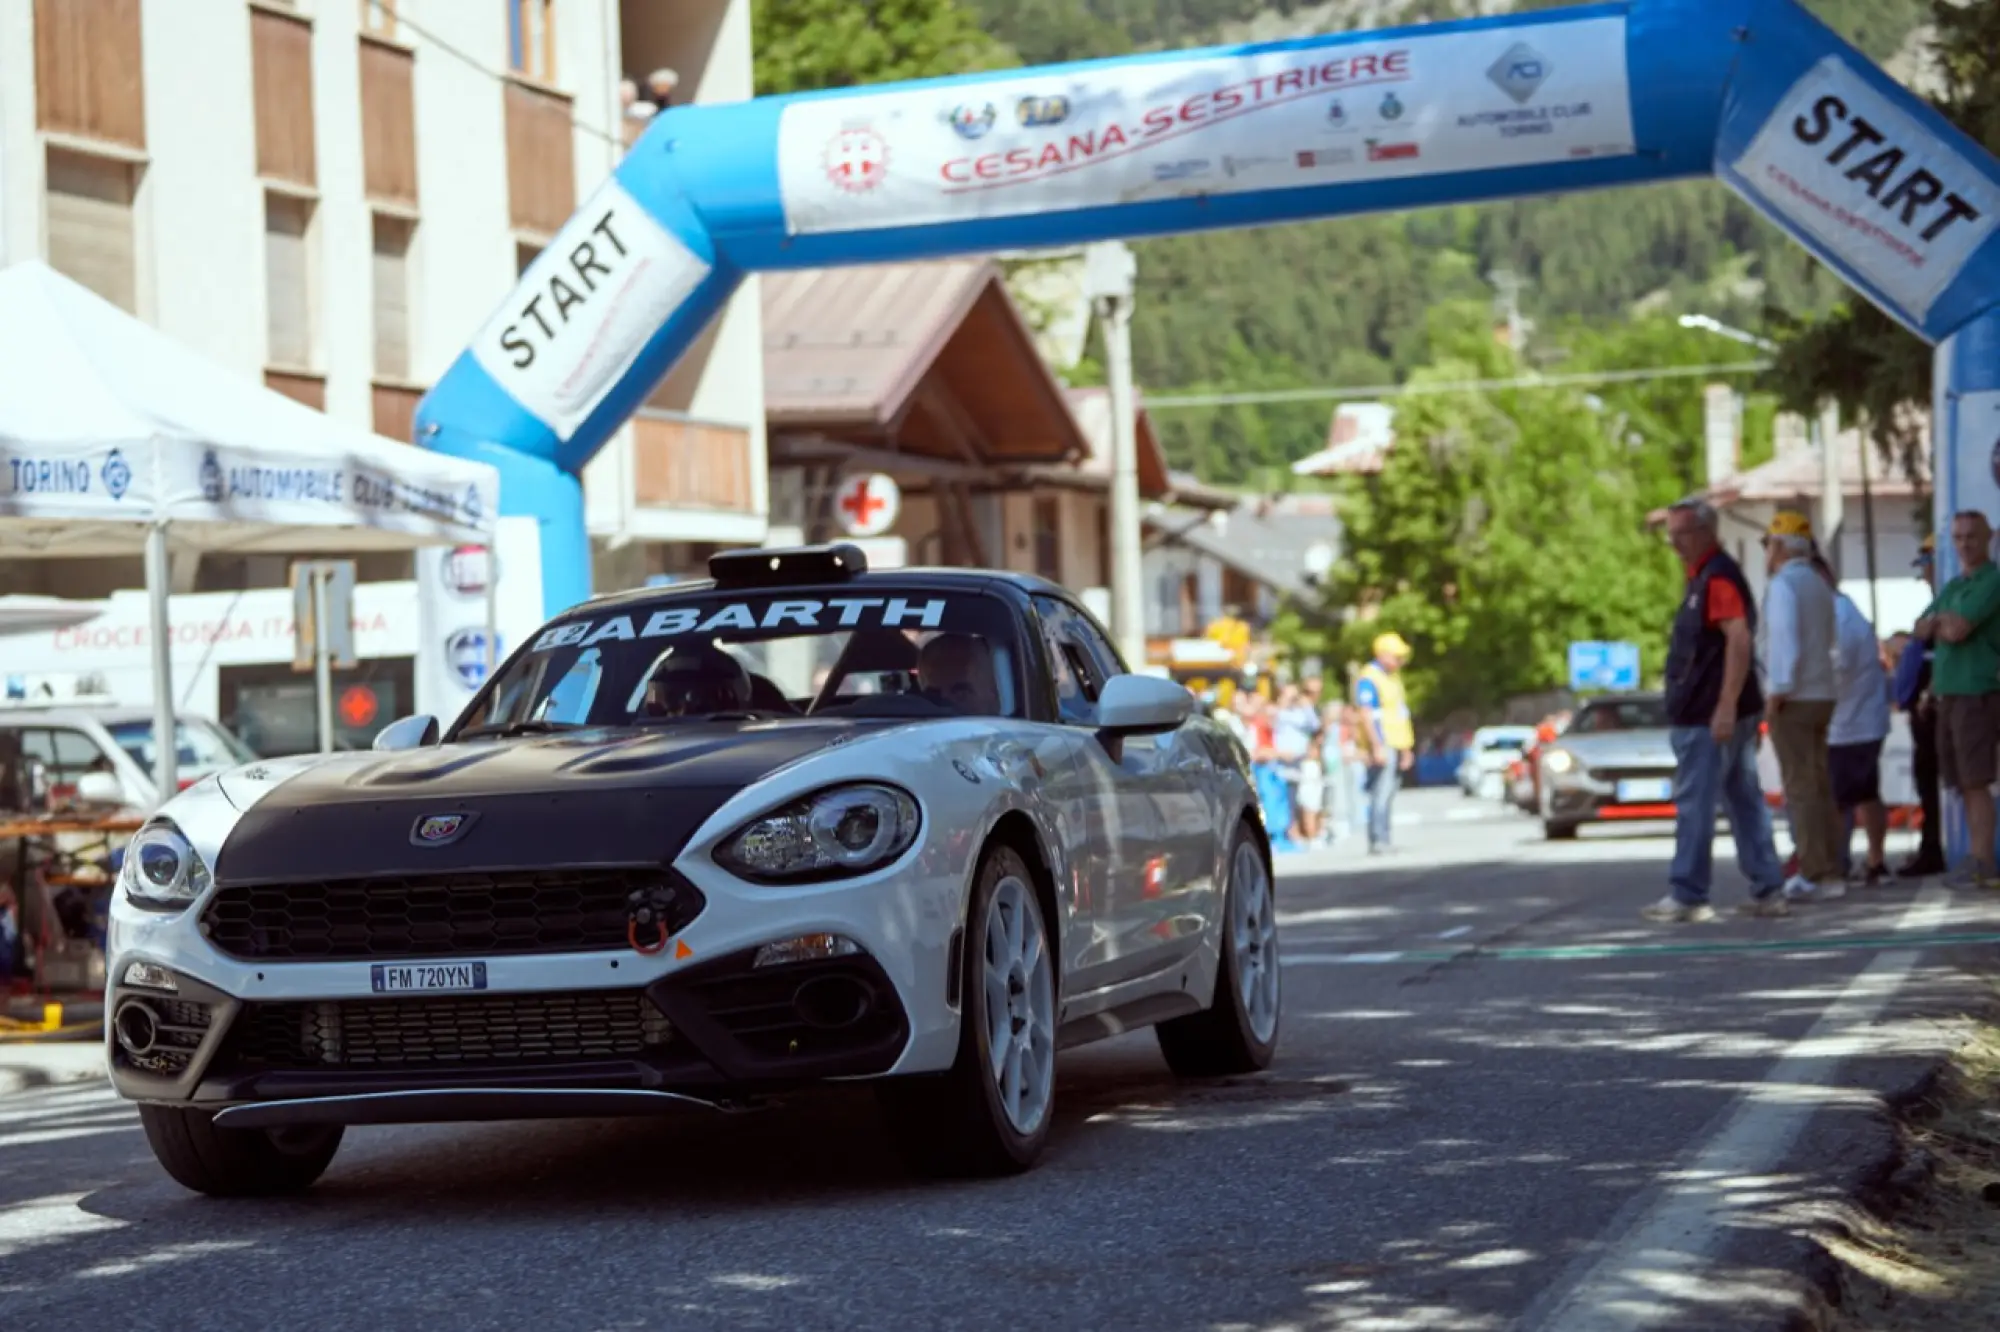 Abarth - Cesana-Sestriere Experience 2019 - 3